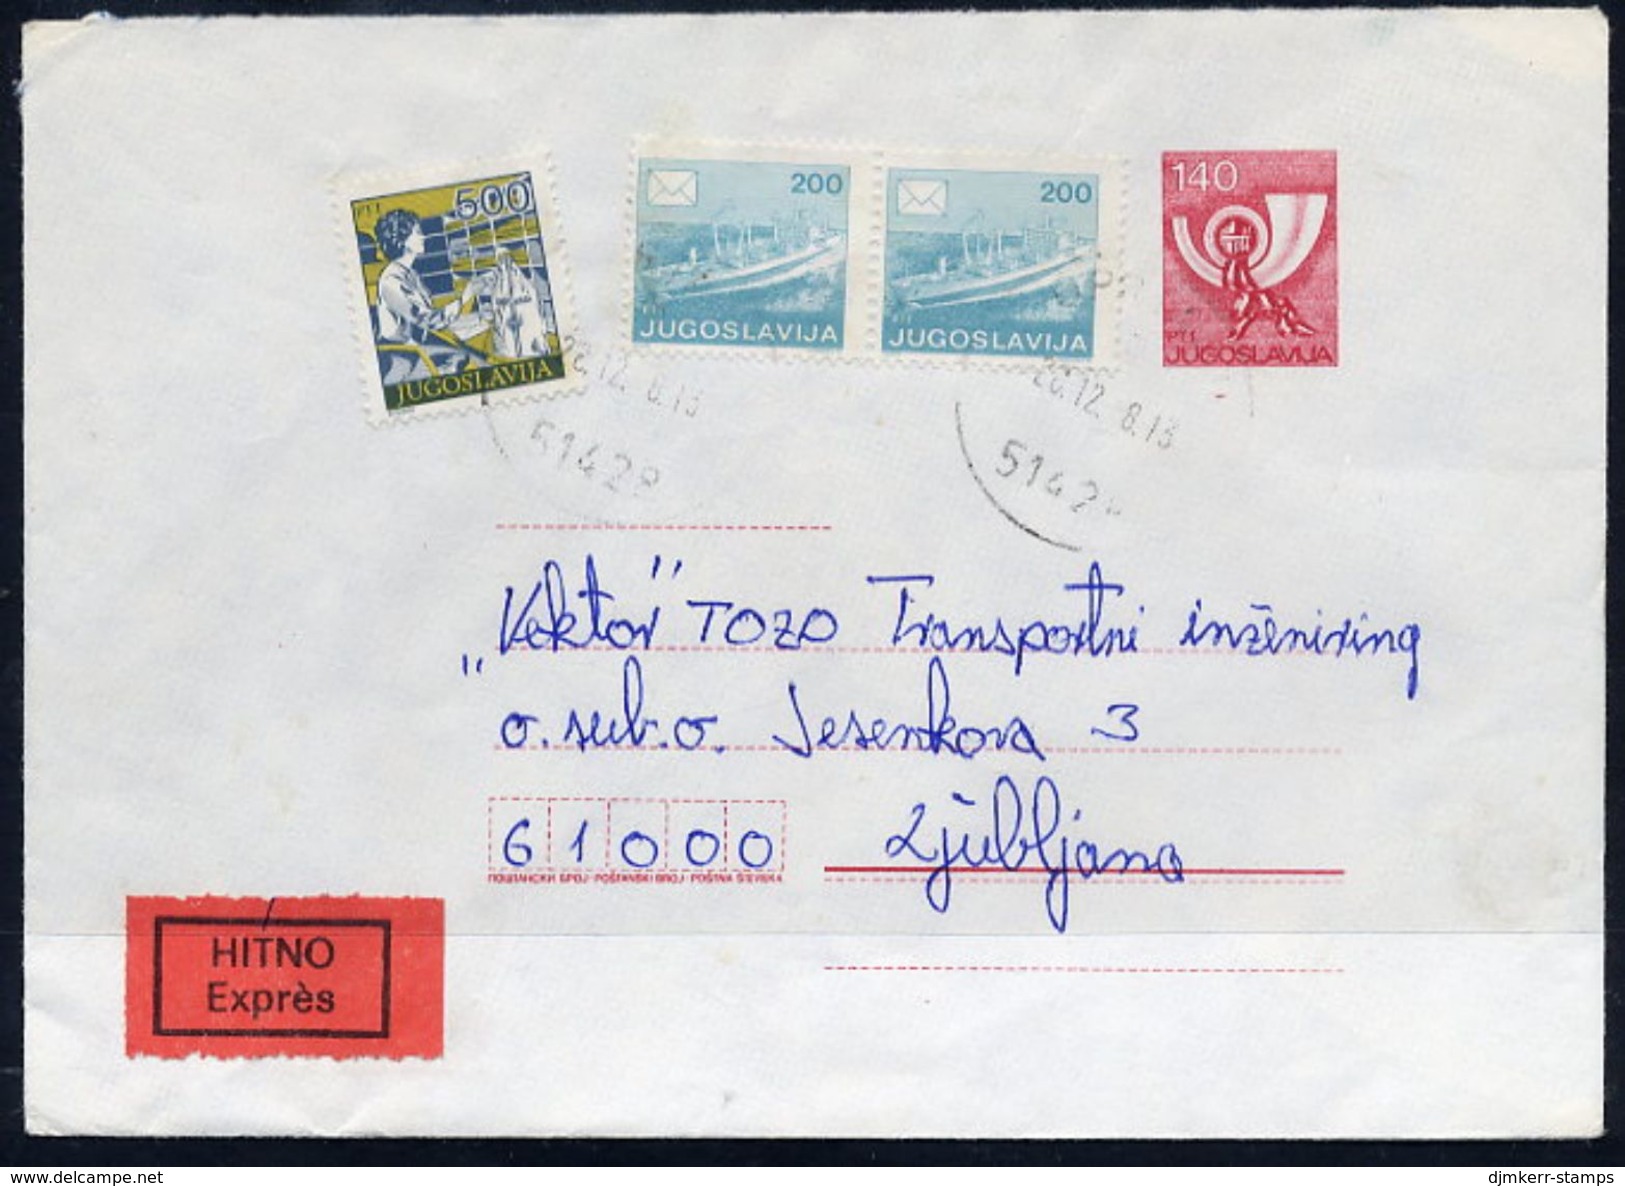 YUGOSLAVIA 1988 Posthorn 140 D.stationery Envelope  Used With Additional Franking And Express Label.  Michel U81 - Entiers Postaux